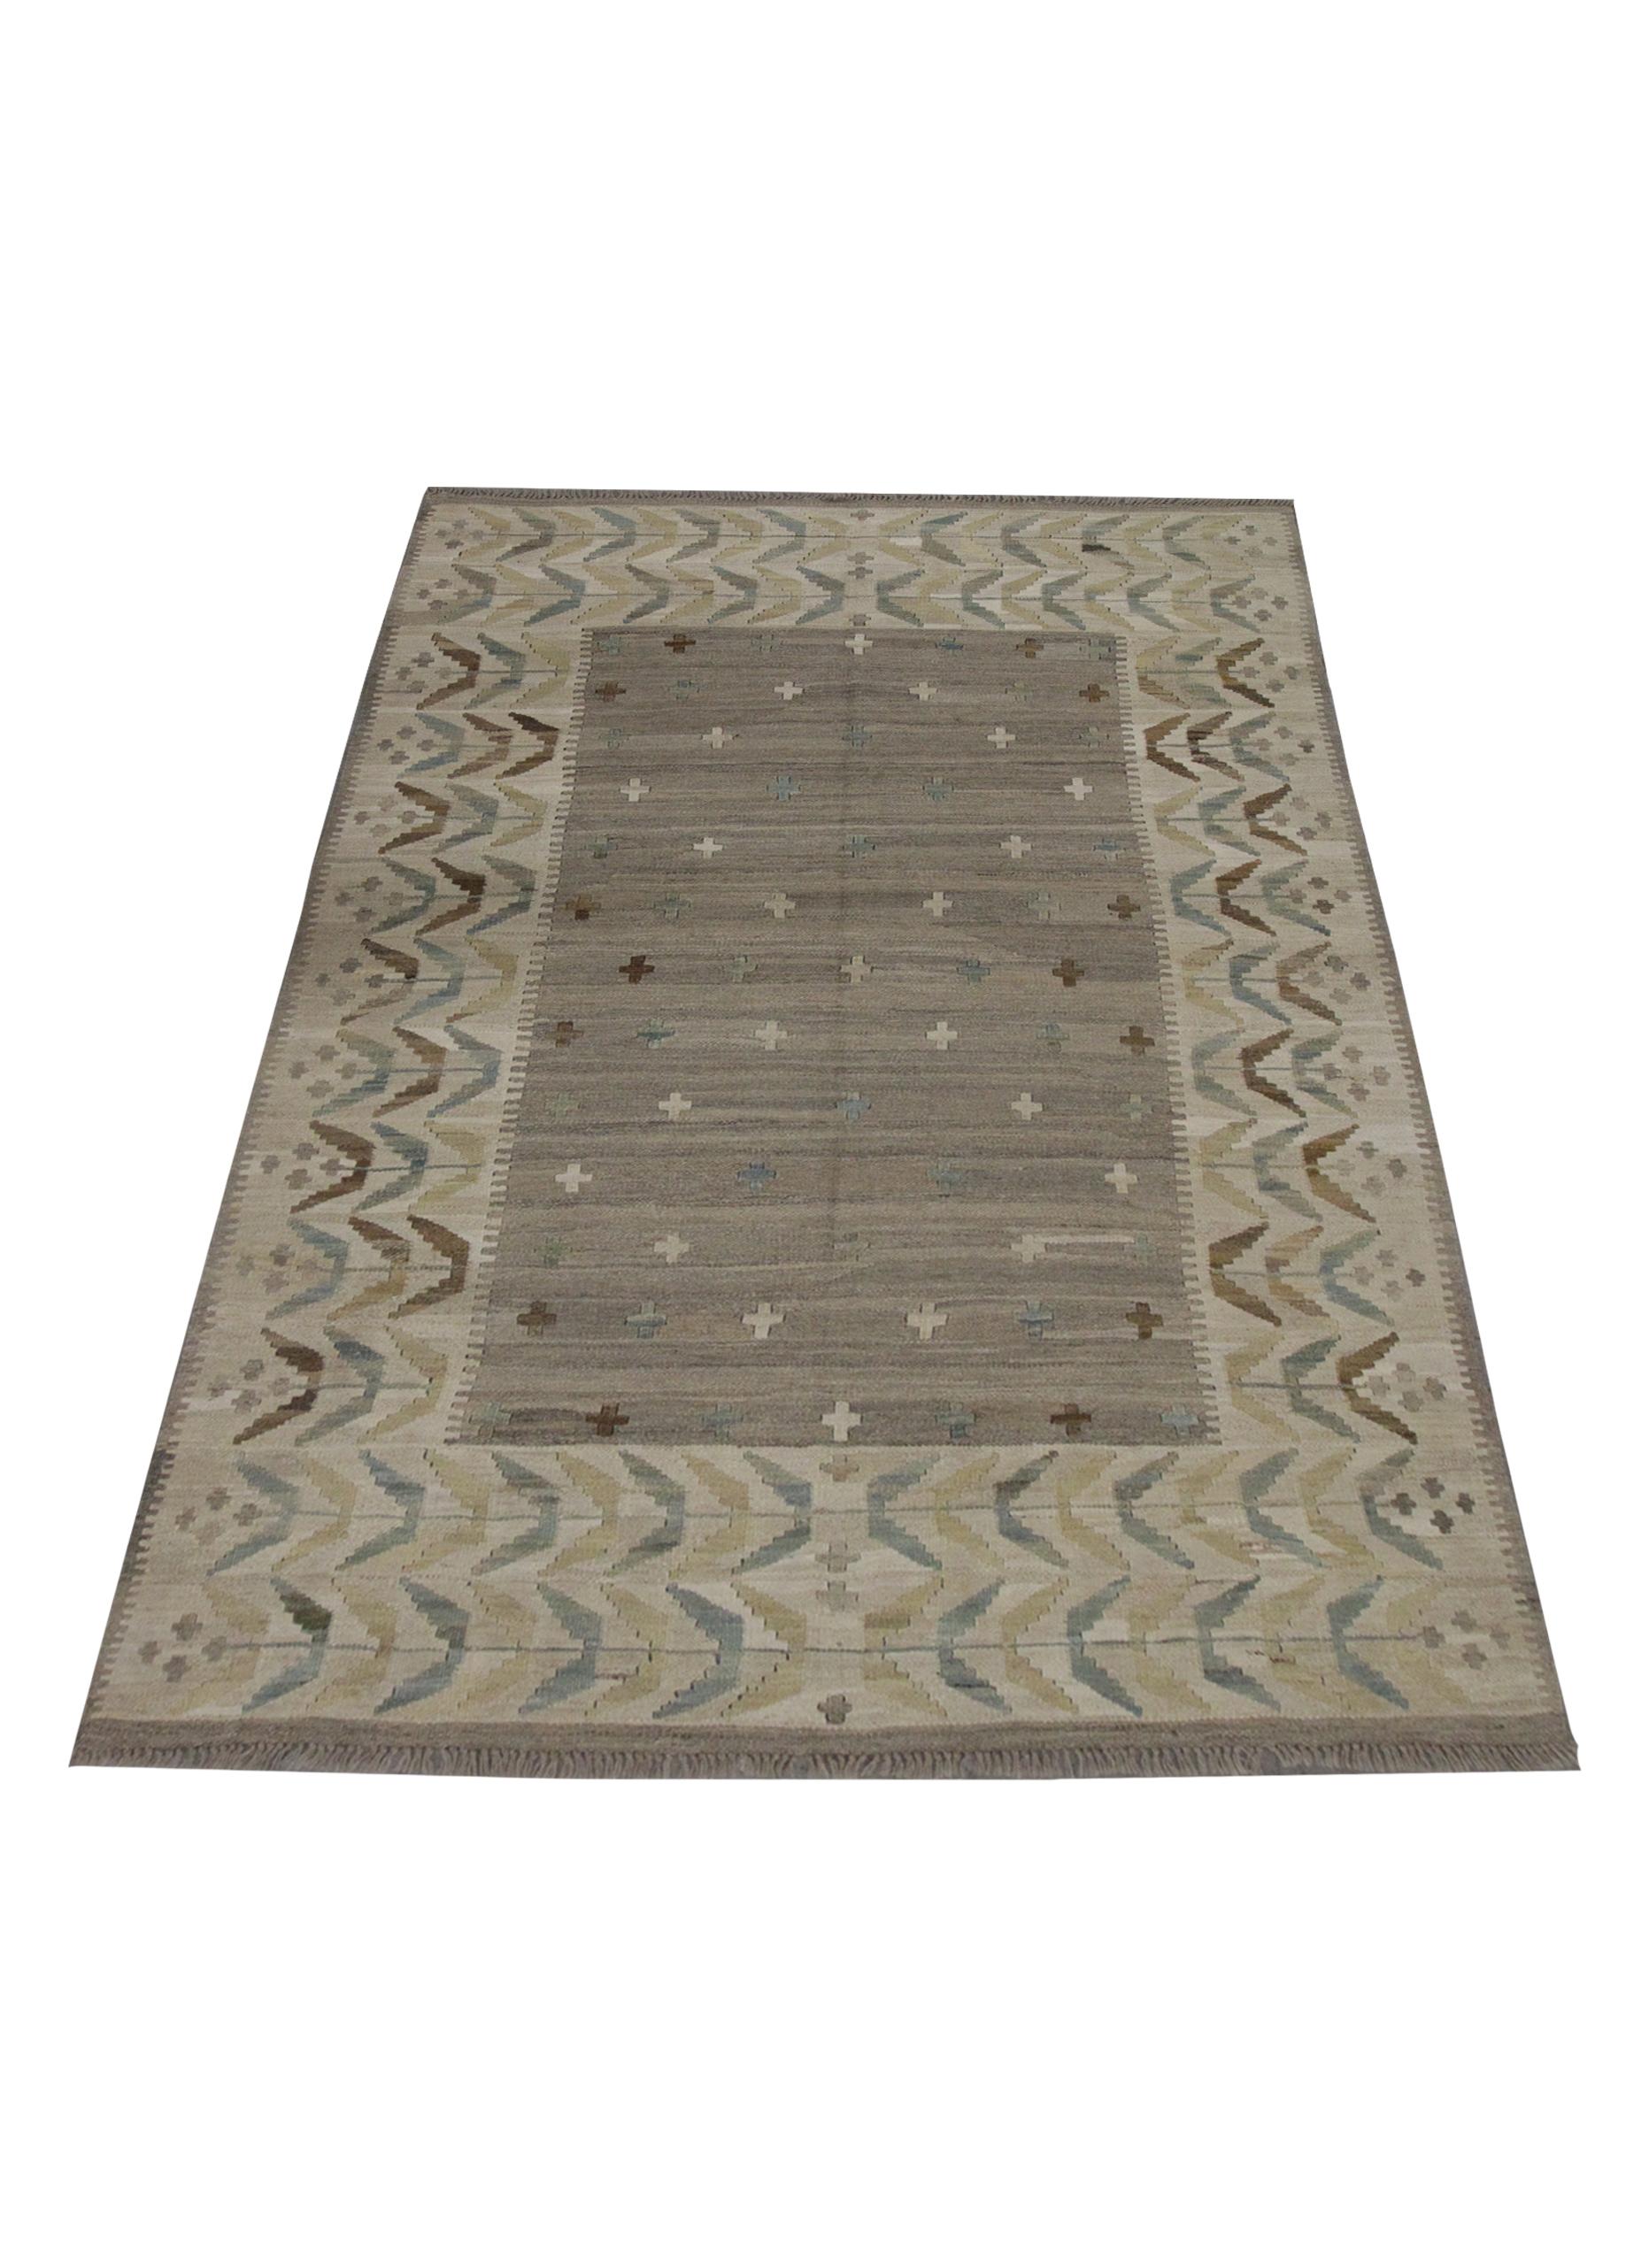 This unique wool Kilim area rug was woven in the early 21st century in Afghanistan. The design features a simple central design featuring a beige open field with Minimalist Khaki brown grey and blue cross motifs that are evenly scattered. A